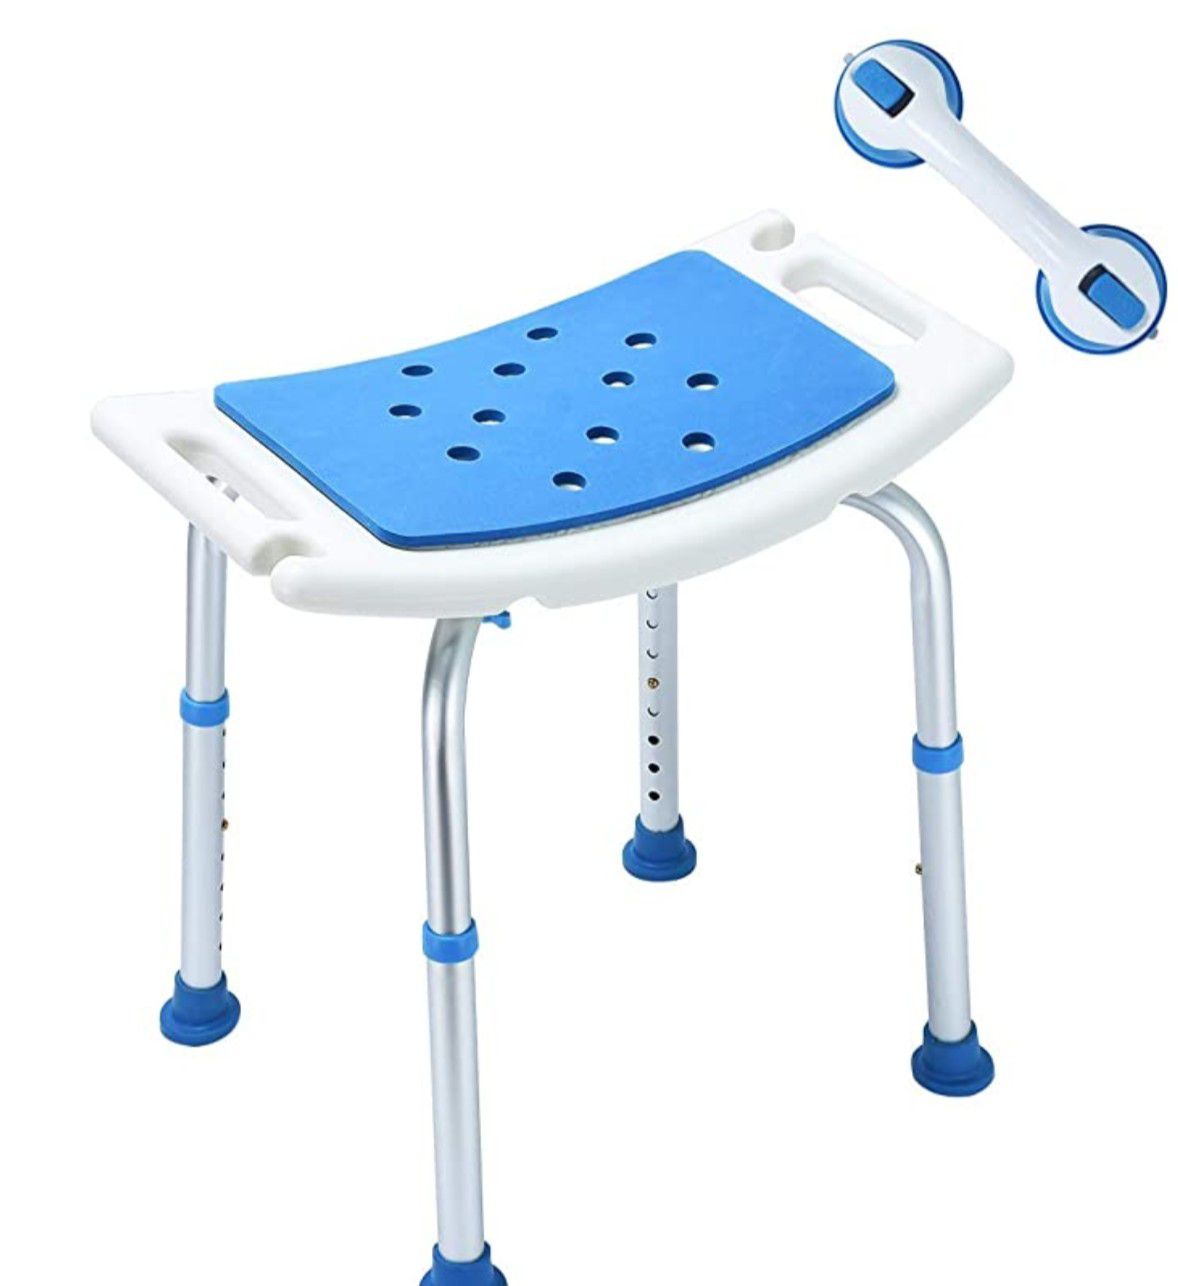 shower stool with support bar,,supports up to 300 pound